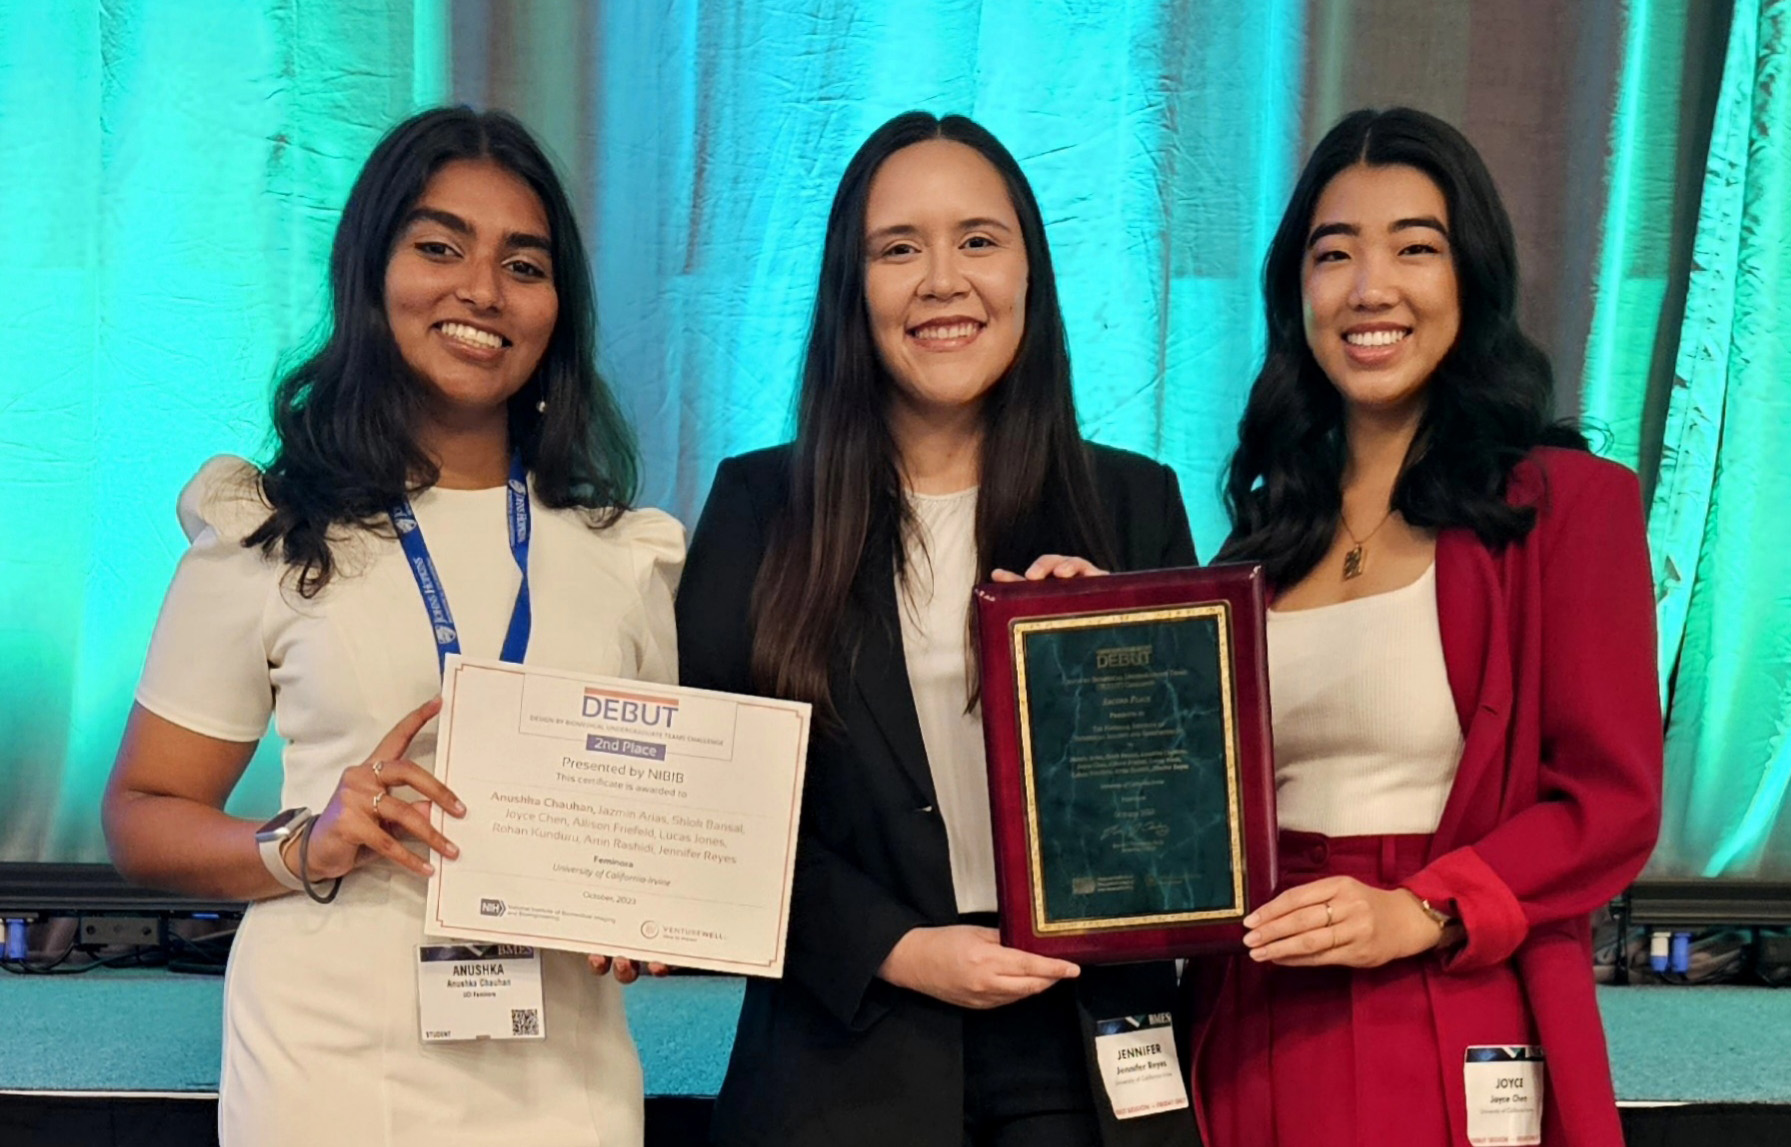 From left: Anushka Chauhan, Jennifer Reyes, and Joyce Chen with their award at the National Institute of Health DEBUT Challenge